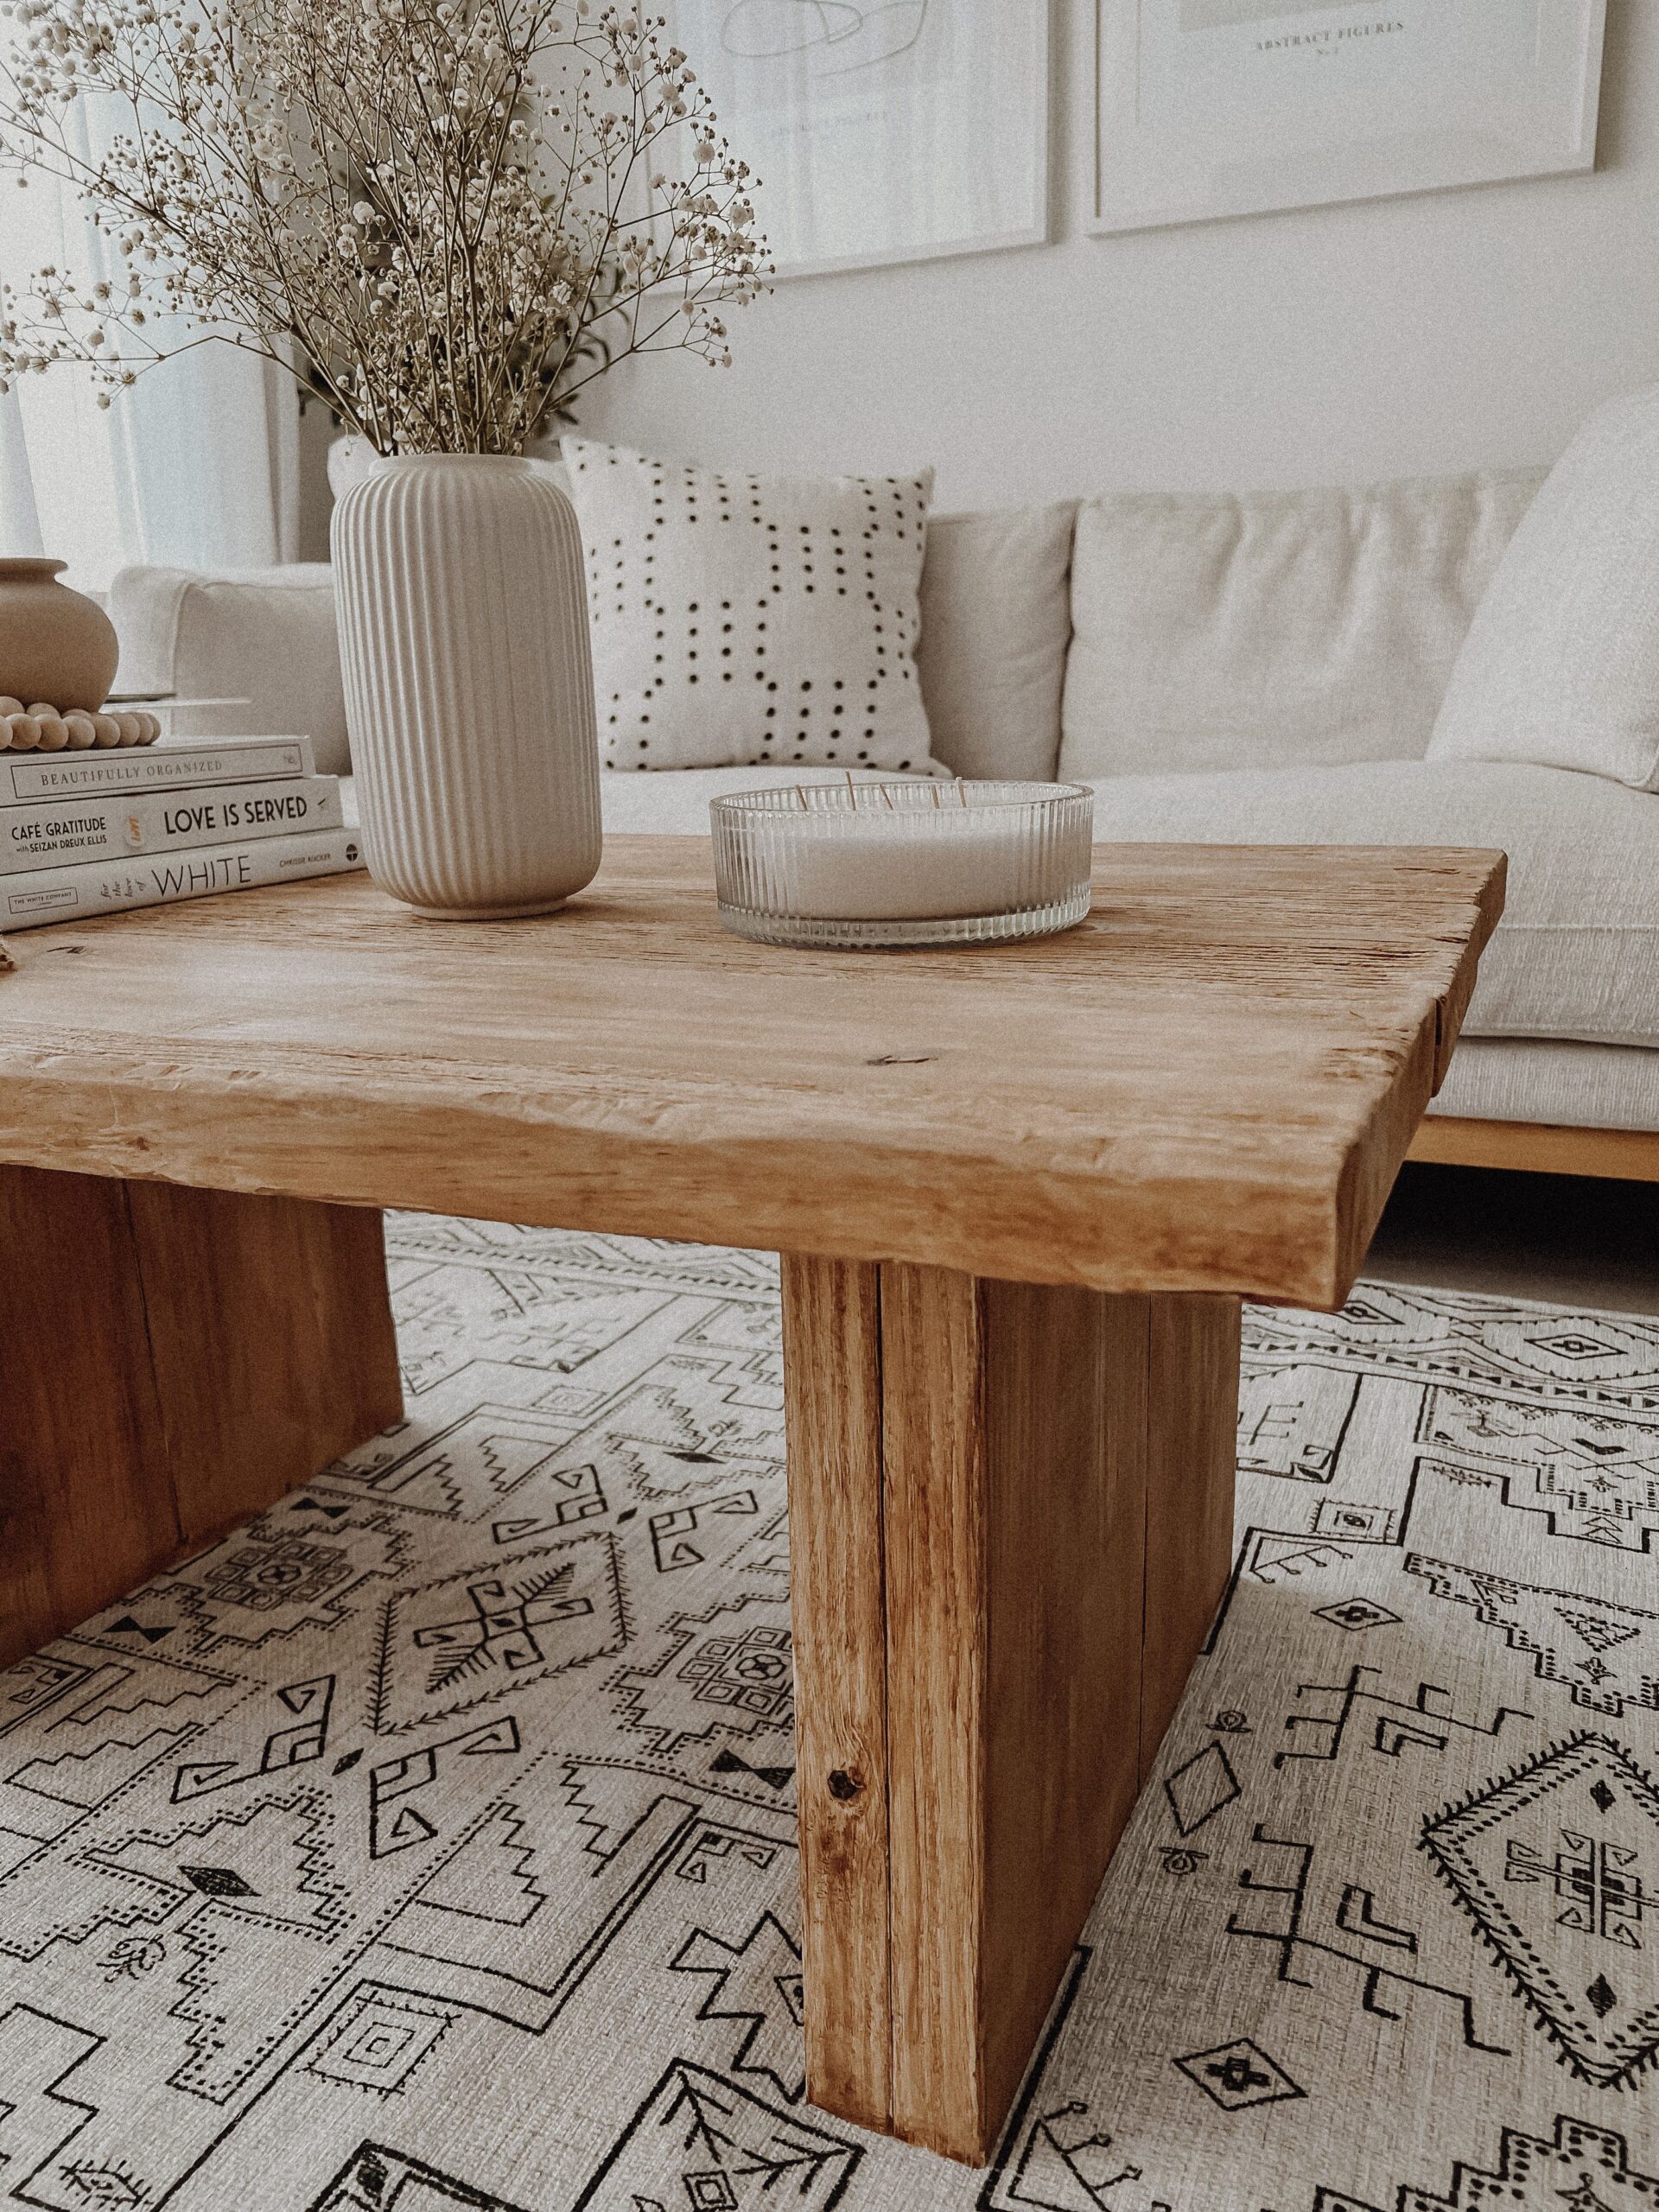 Exploring the Versatility of Haven Coffee
Tables